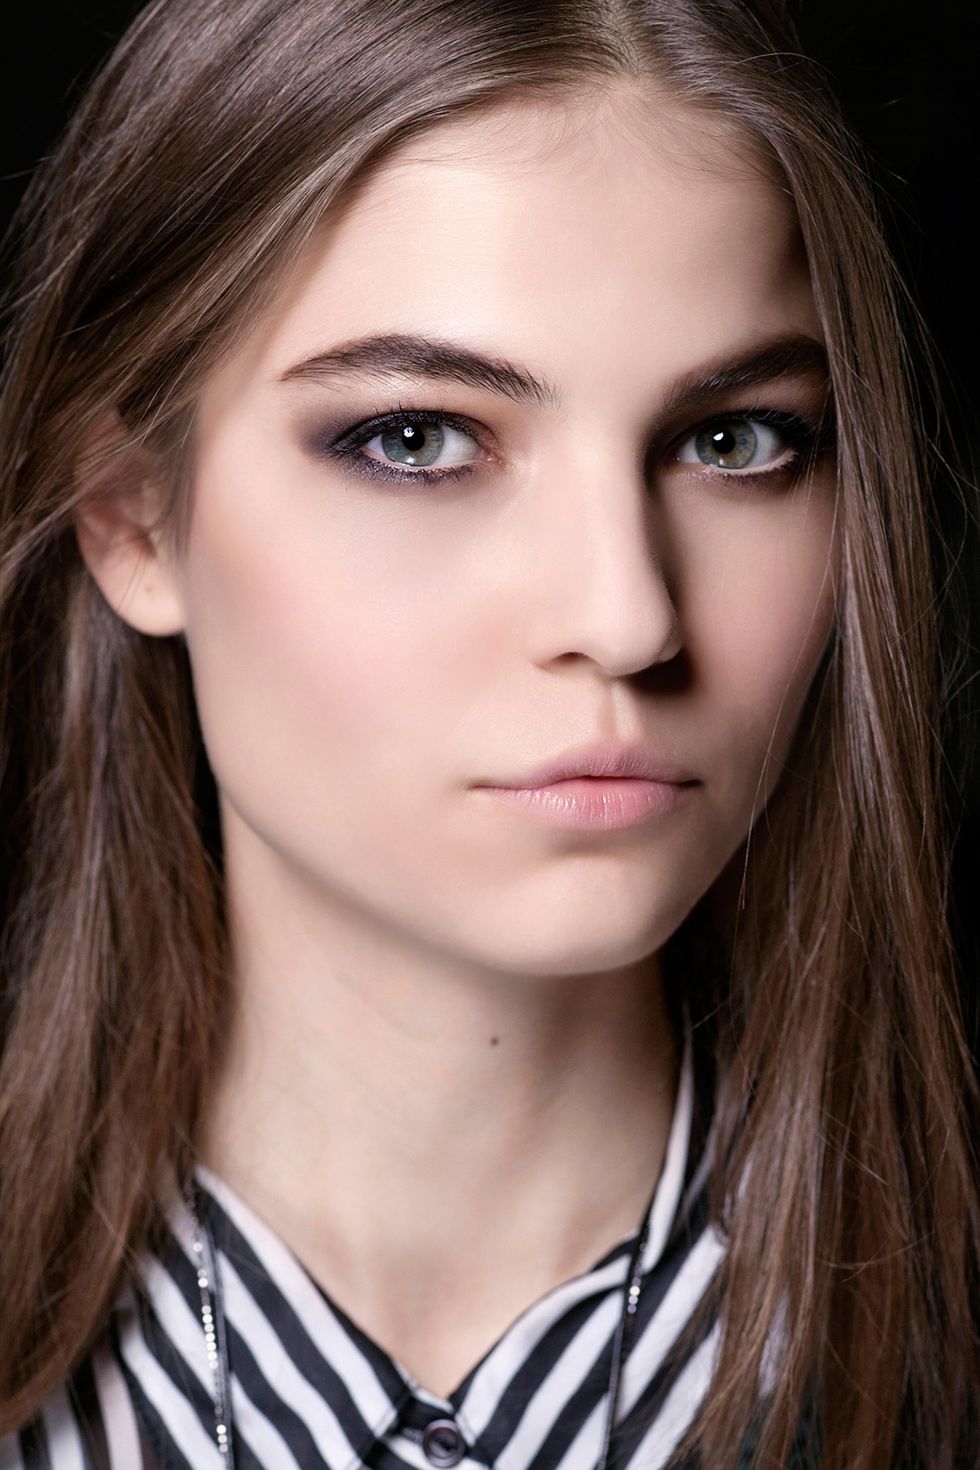 Model with foundation makeup